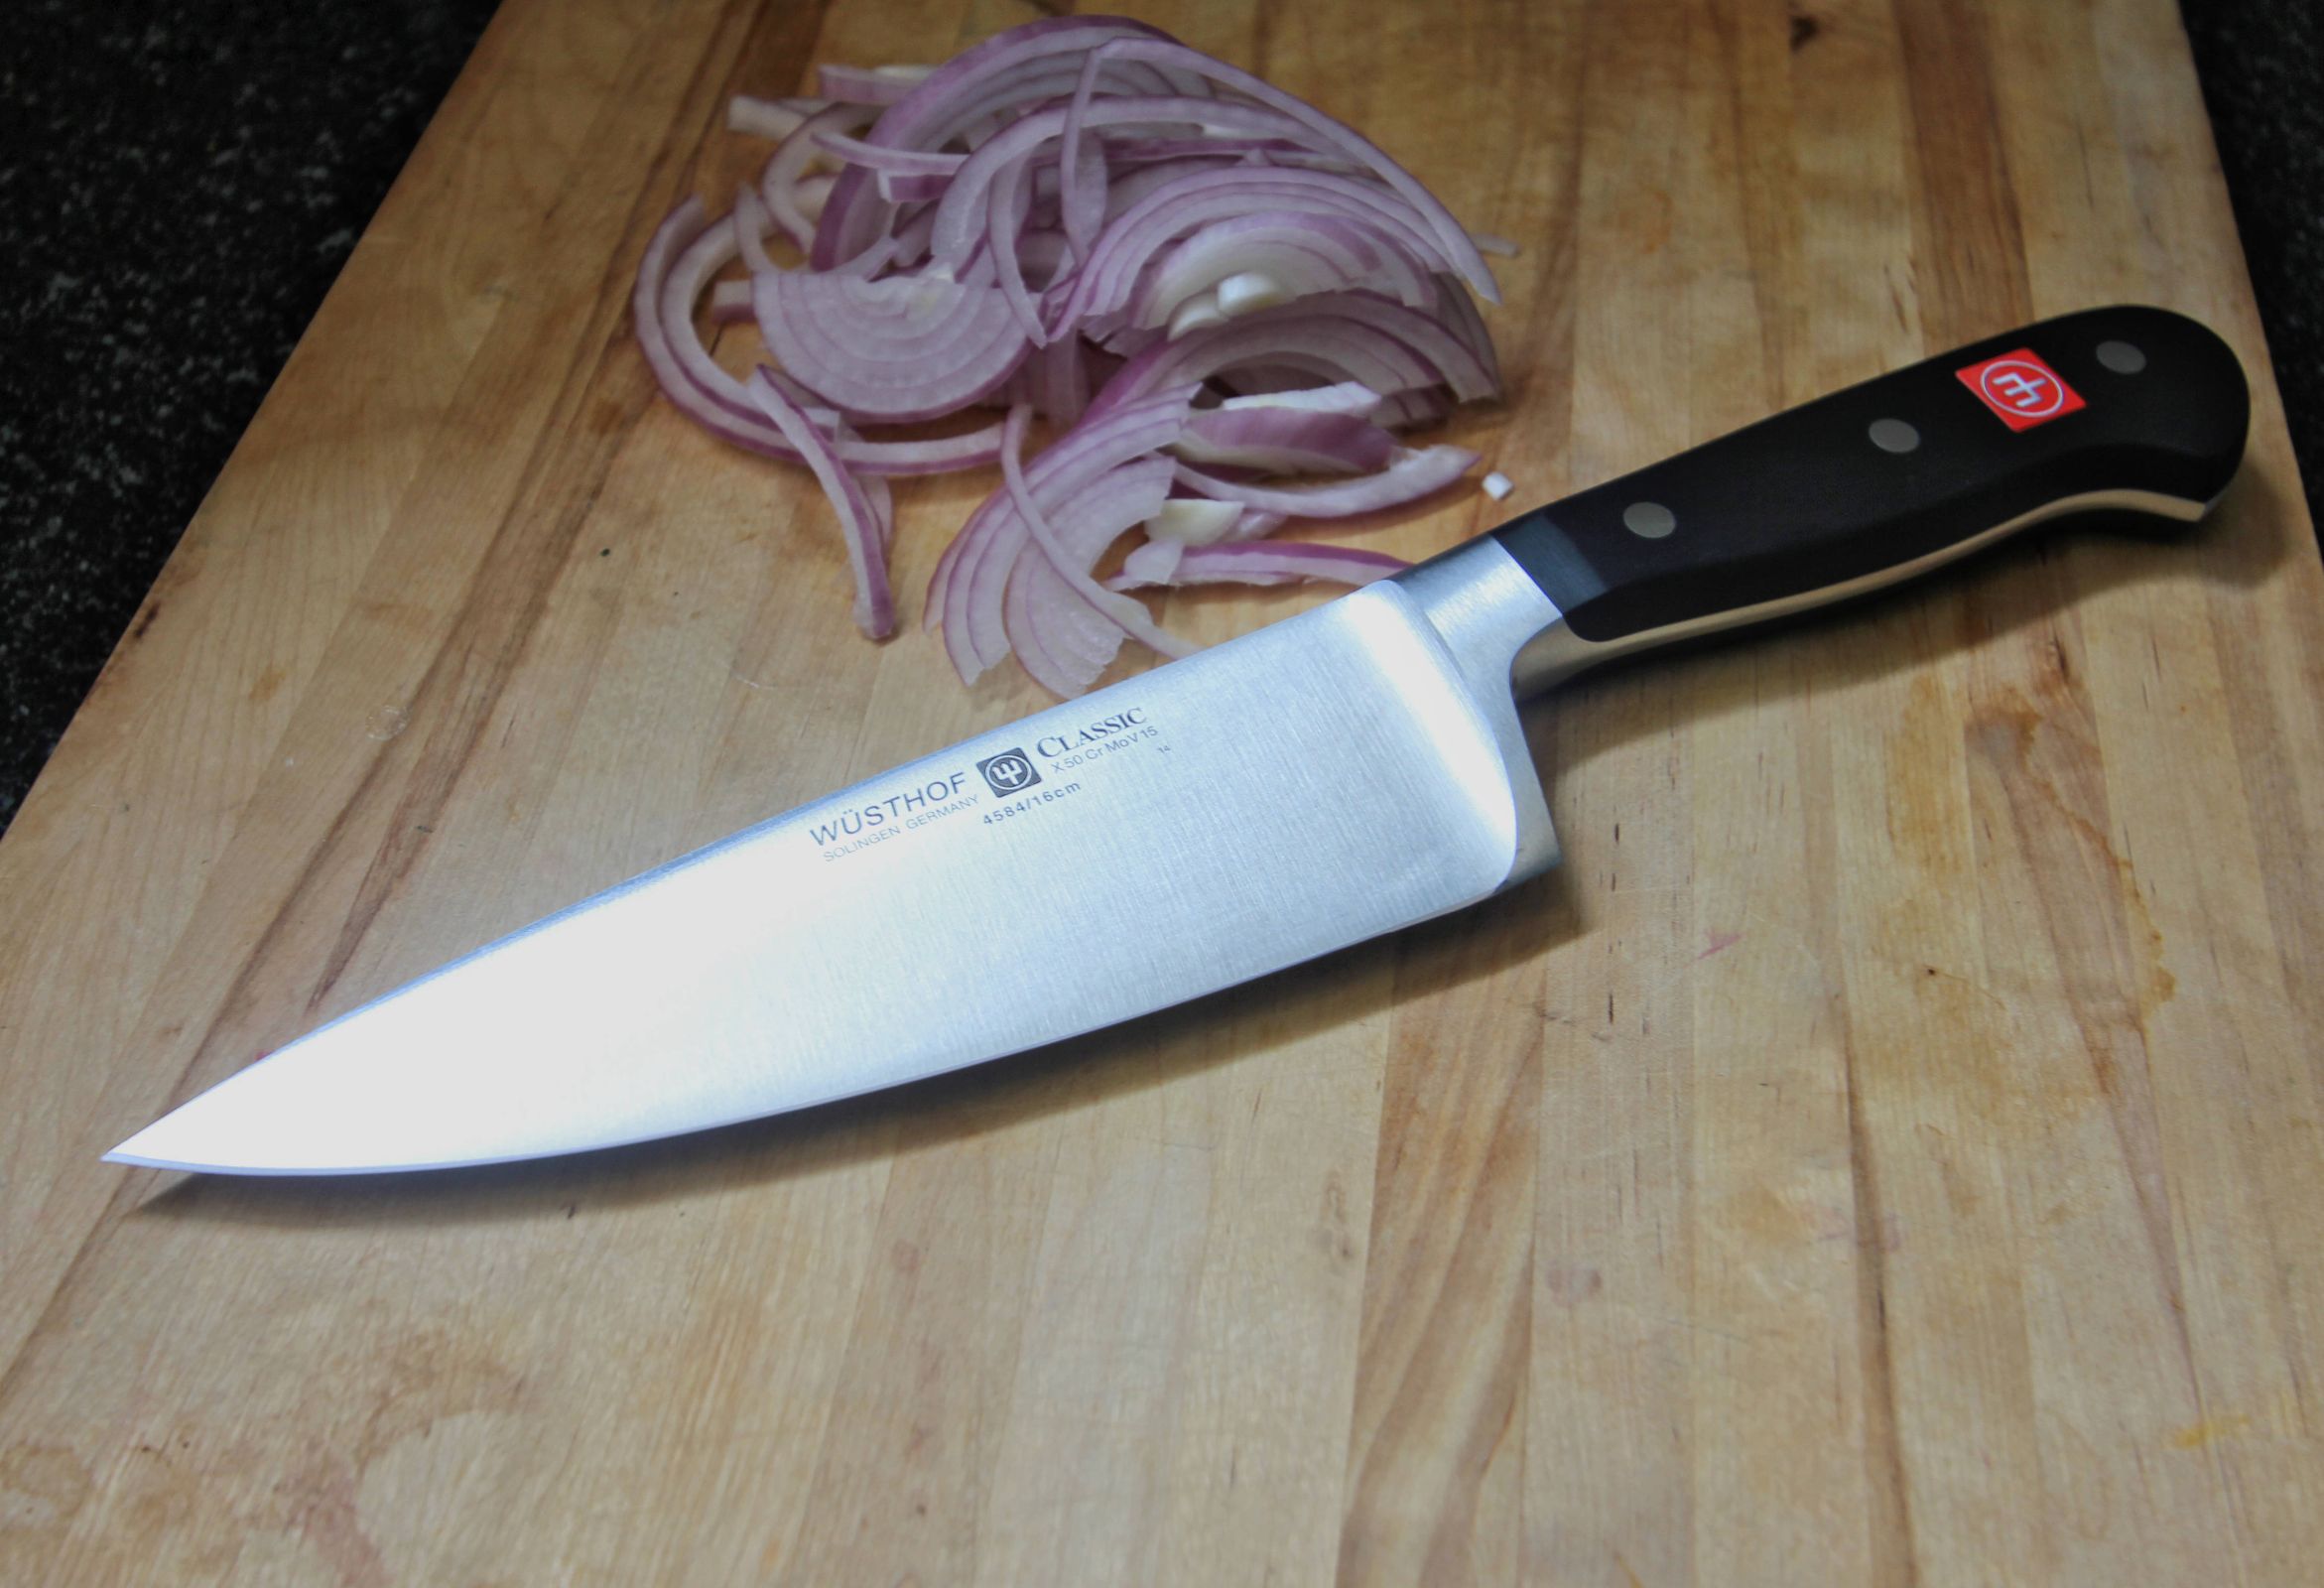 Wusthof Classic 6" Wide Cook Knife